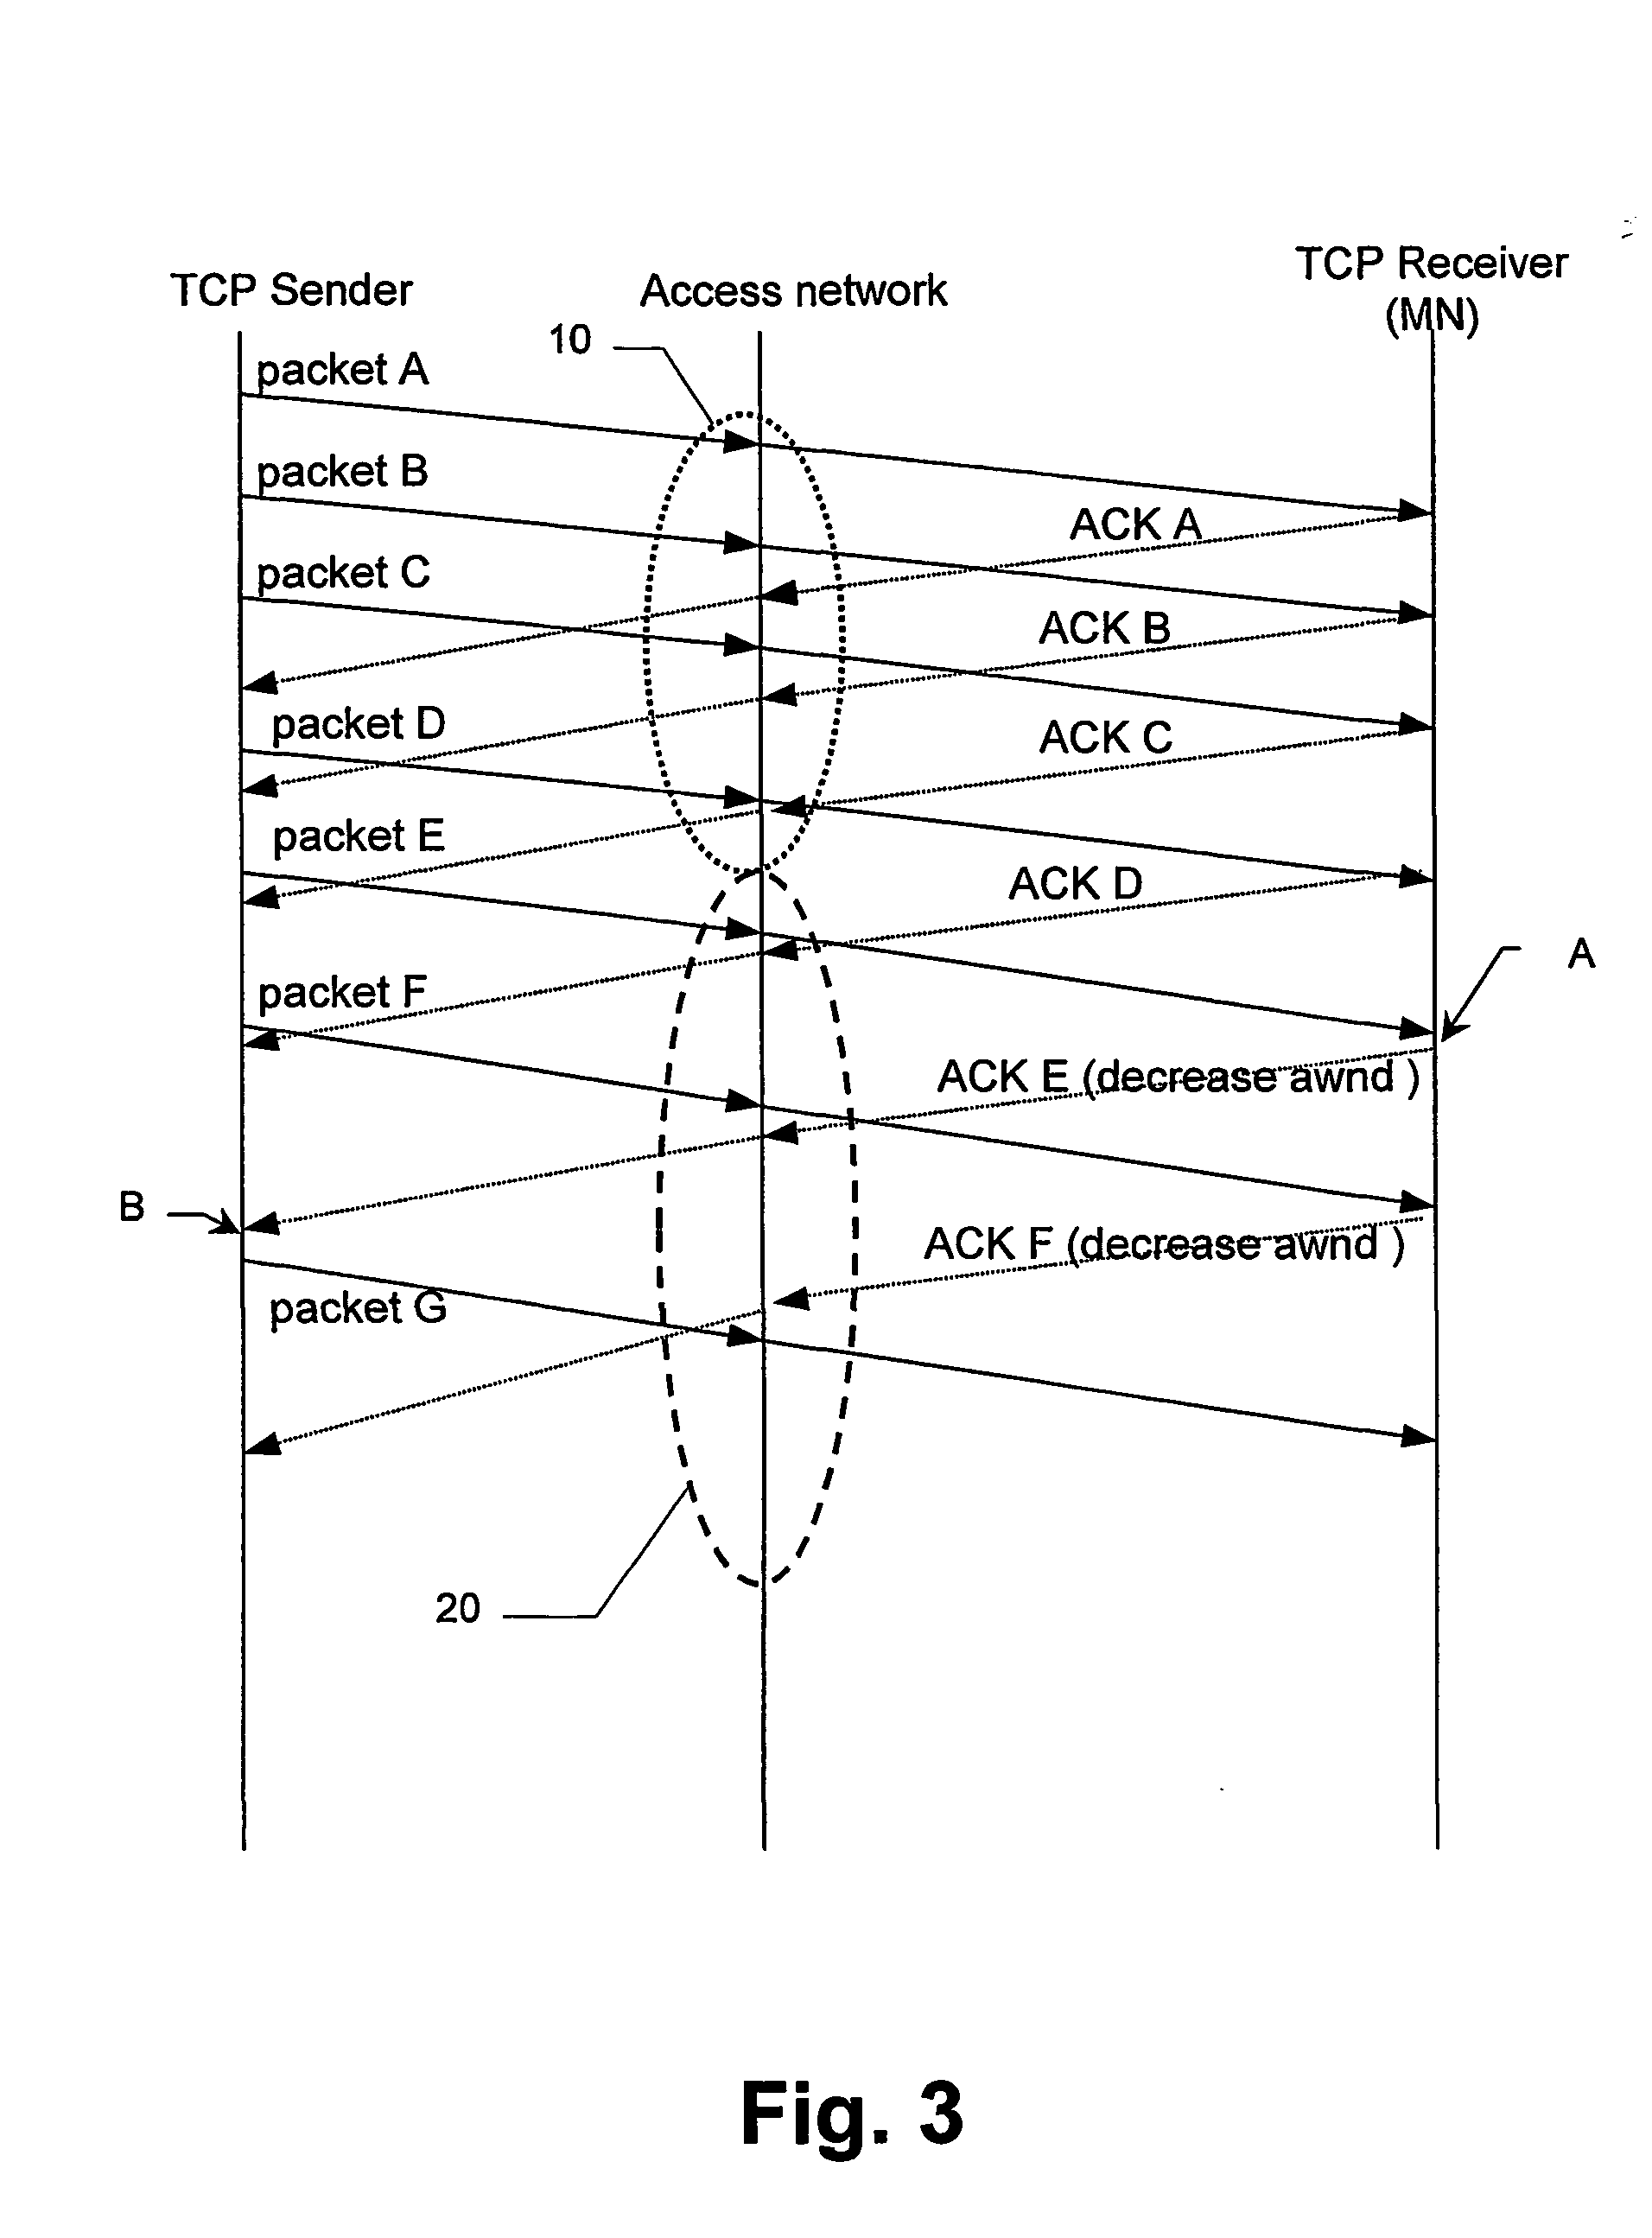 Method, system and device for controlling a transmission window size